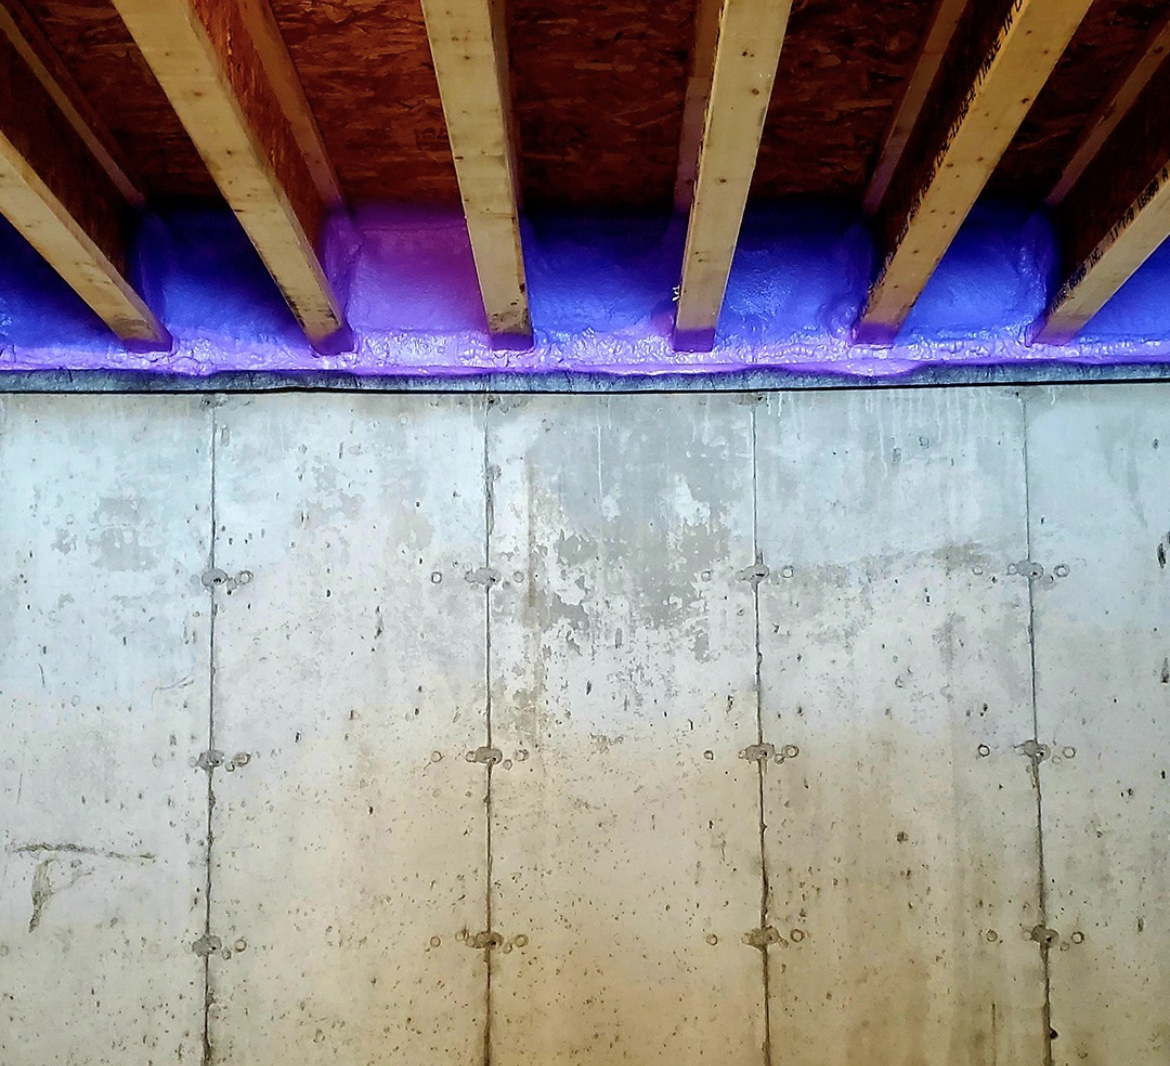 An image showing a wall with wooden beams on the ceiling with insulation installed in the gaps.